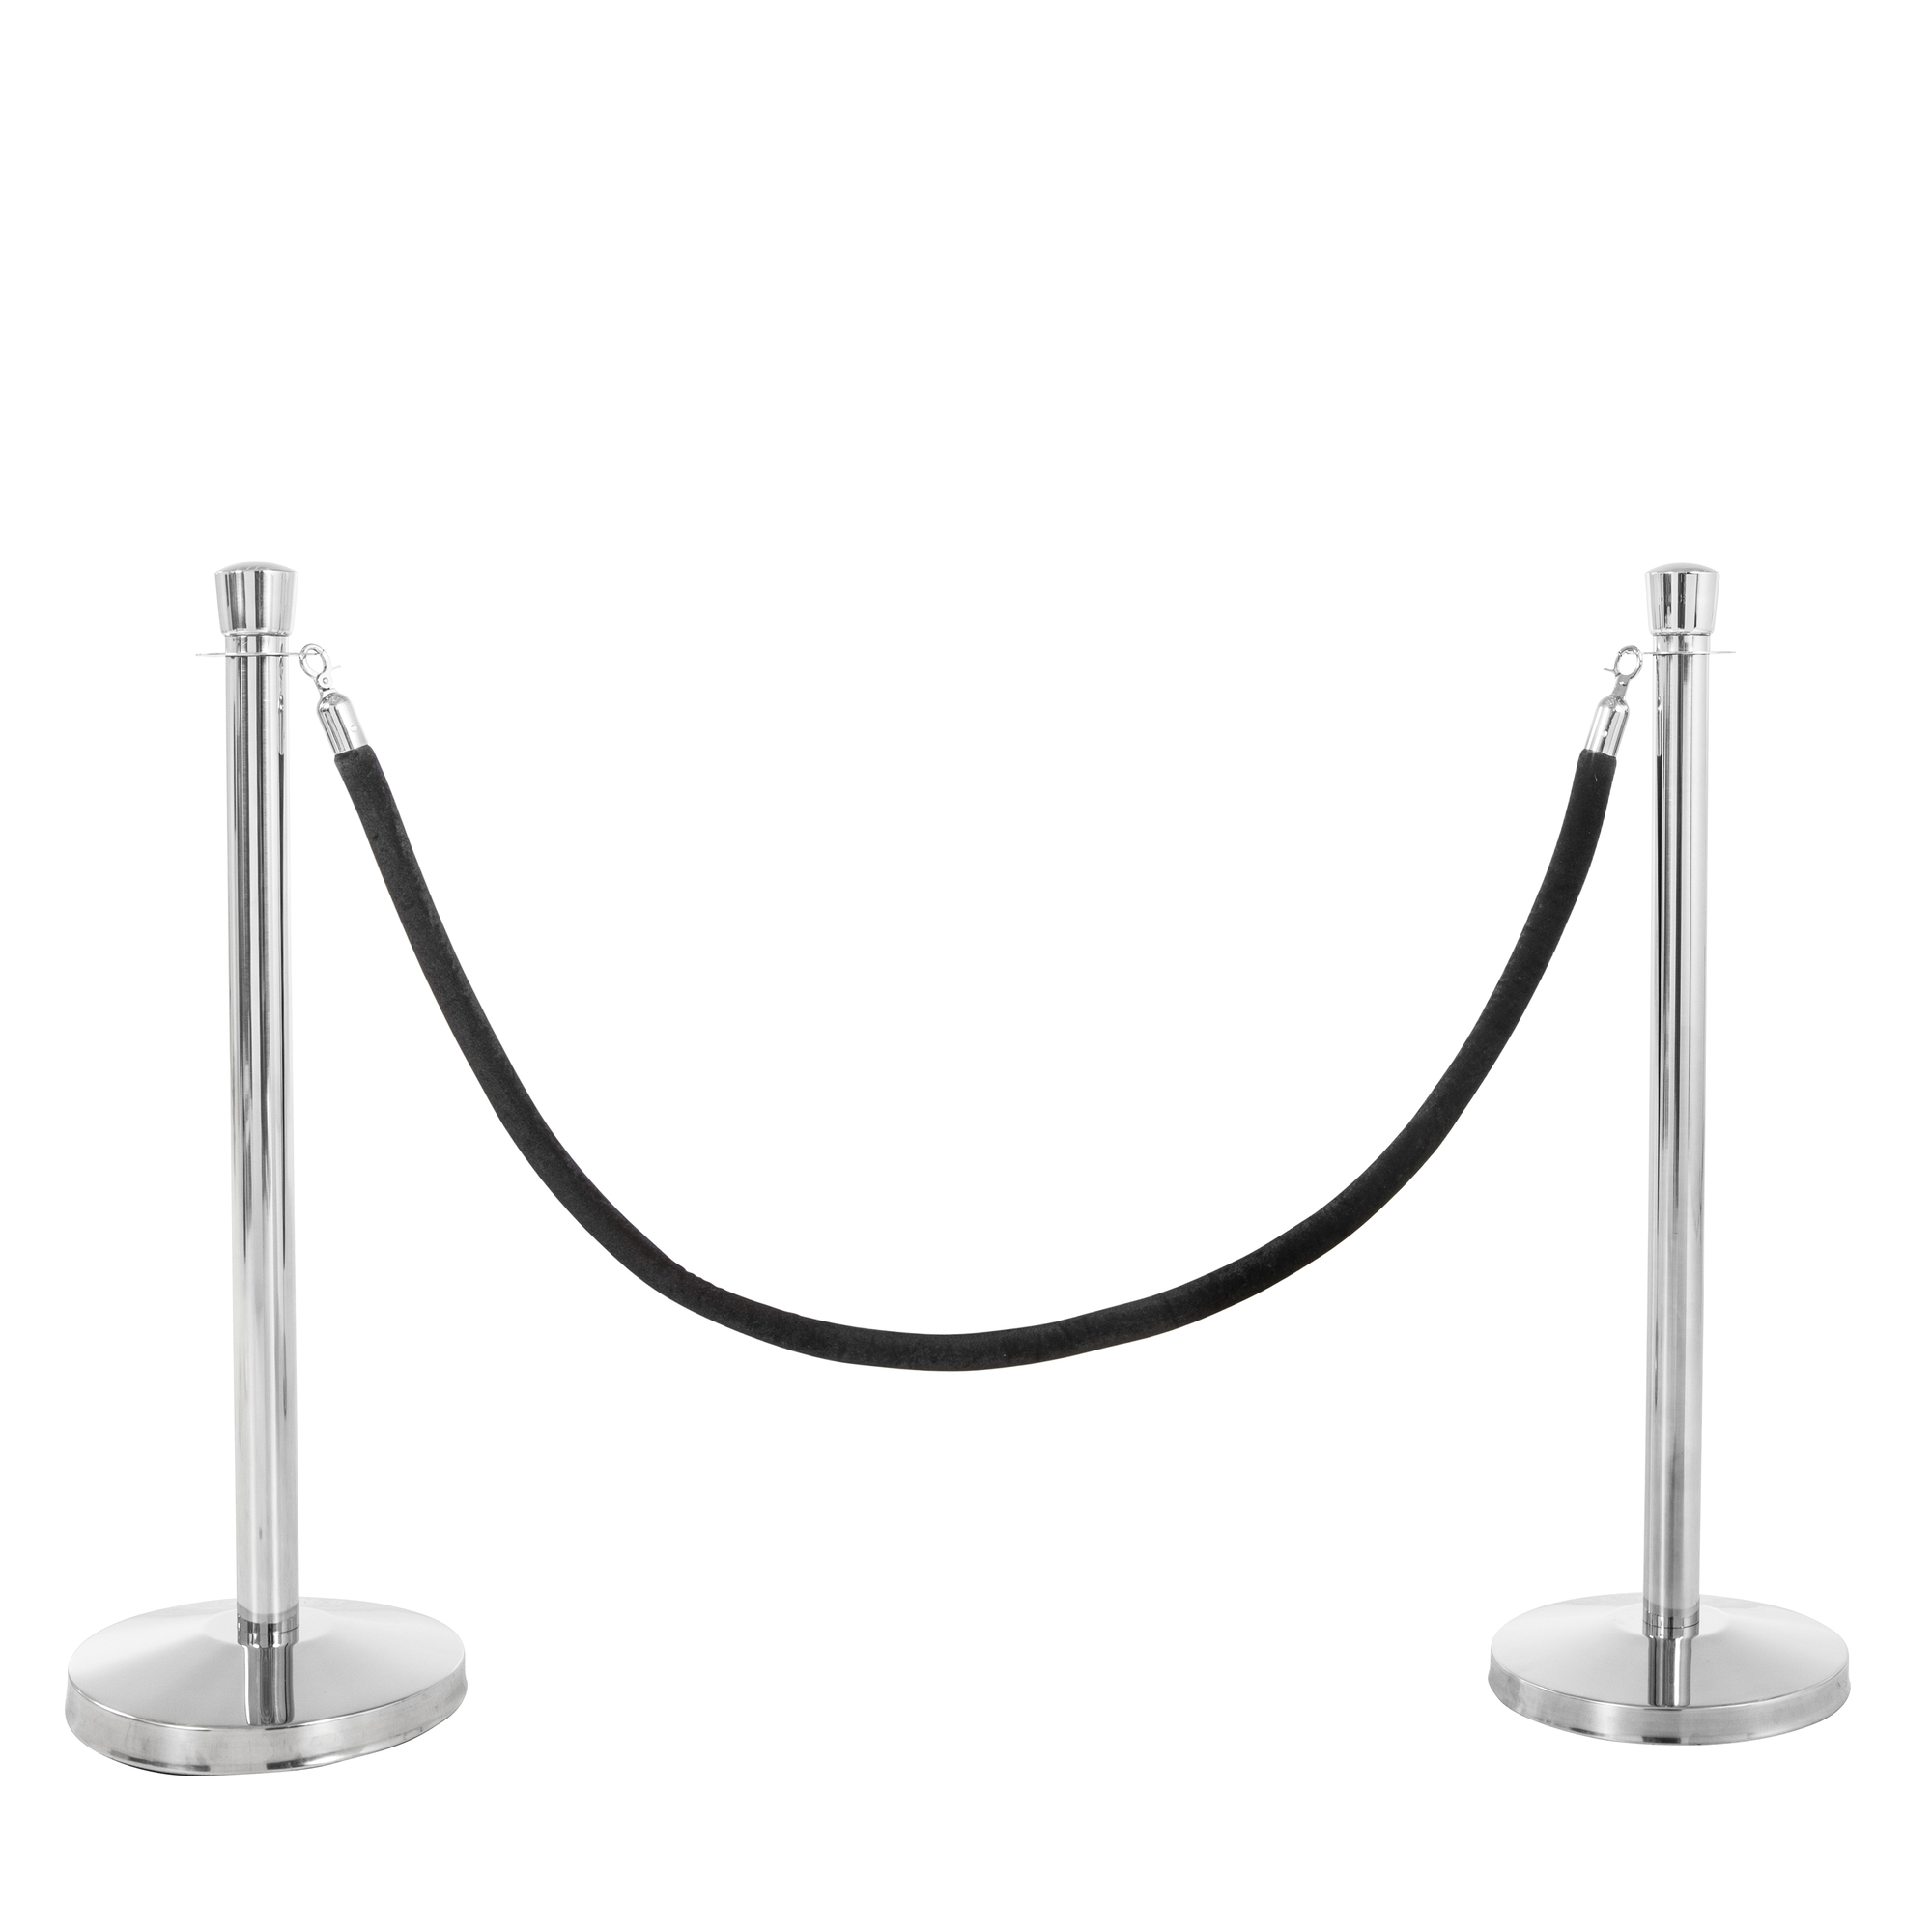 US Weight, Chrome stanchion - 2 pack and 6ft. Black Rope, Model U2140